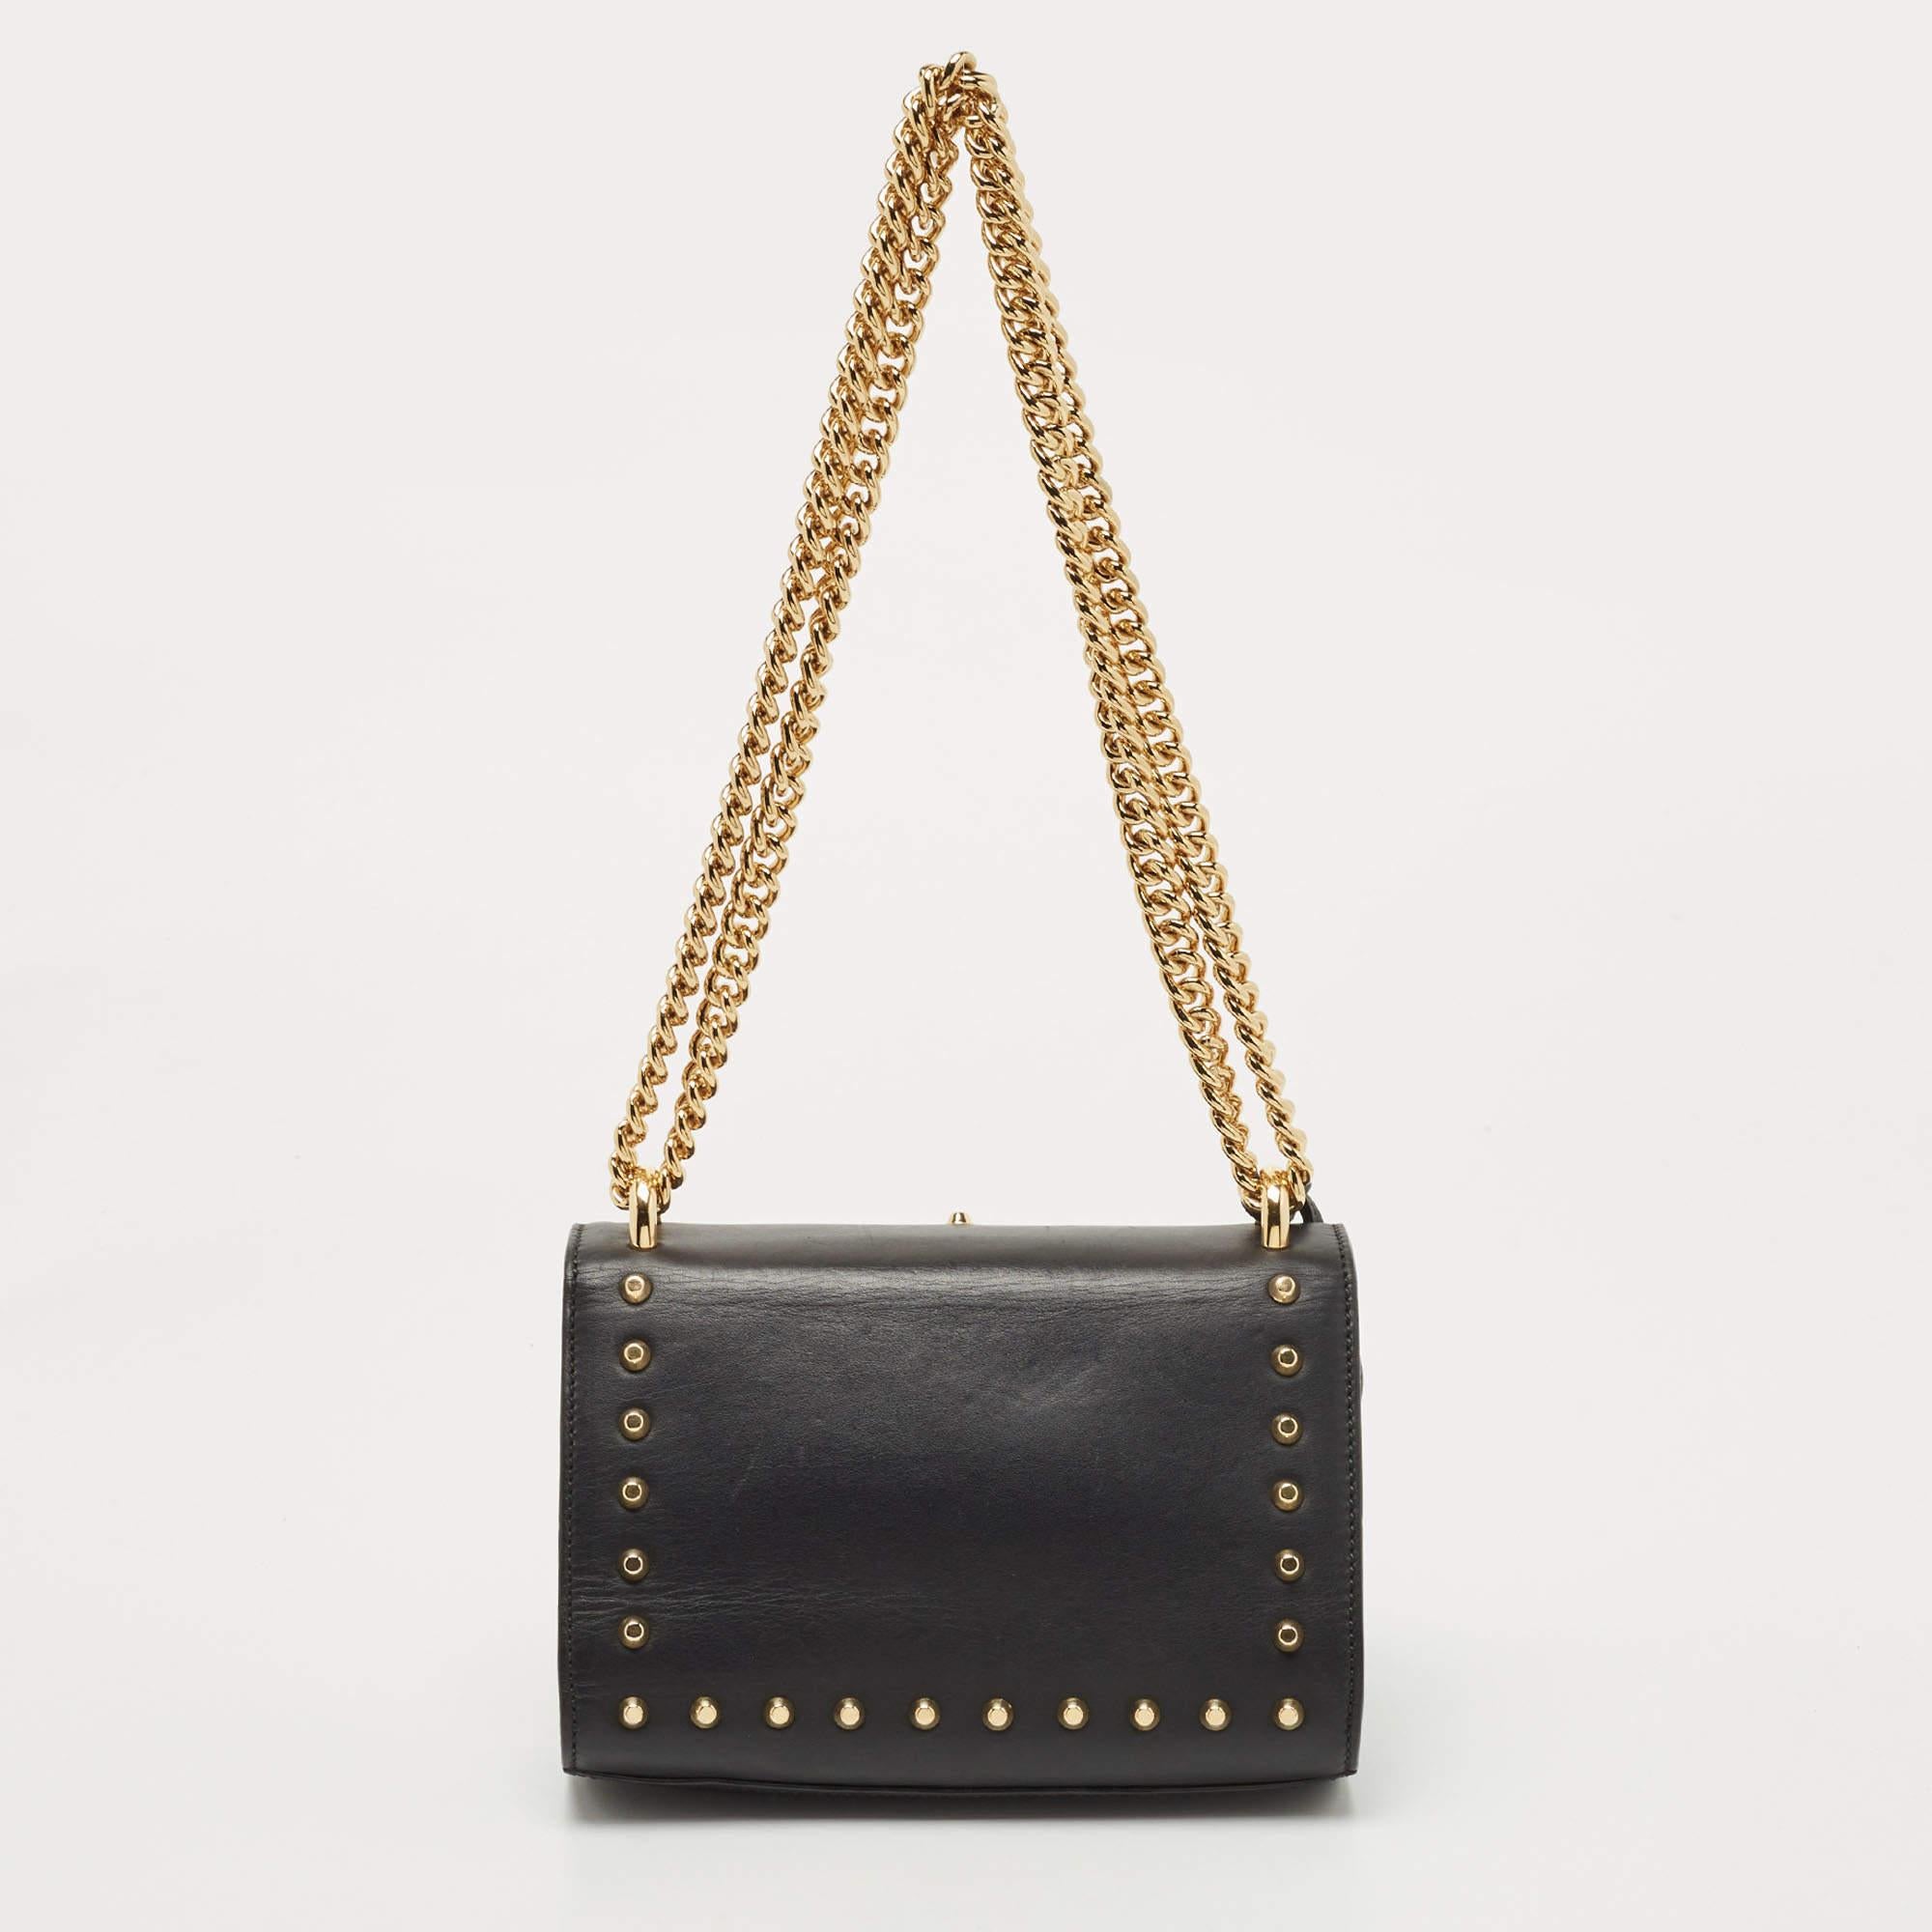 This Gucci creation has been skillfully crafted from leather and styled with embellishments and a flap holding a signature lock. The insides are lined with suede and sized to hold your essentials dutifully. The bag is equipped with a chain link so